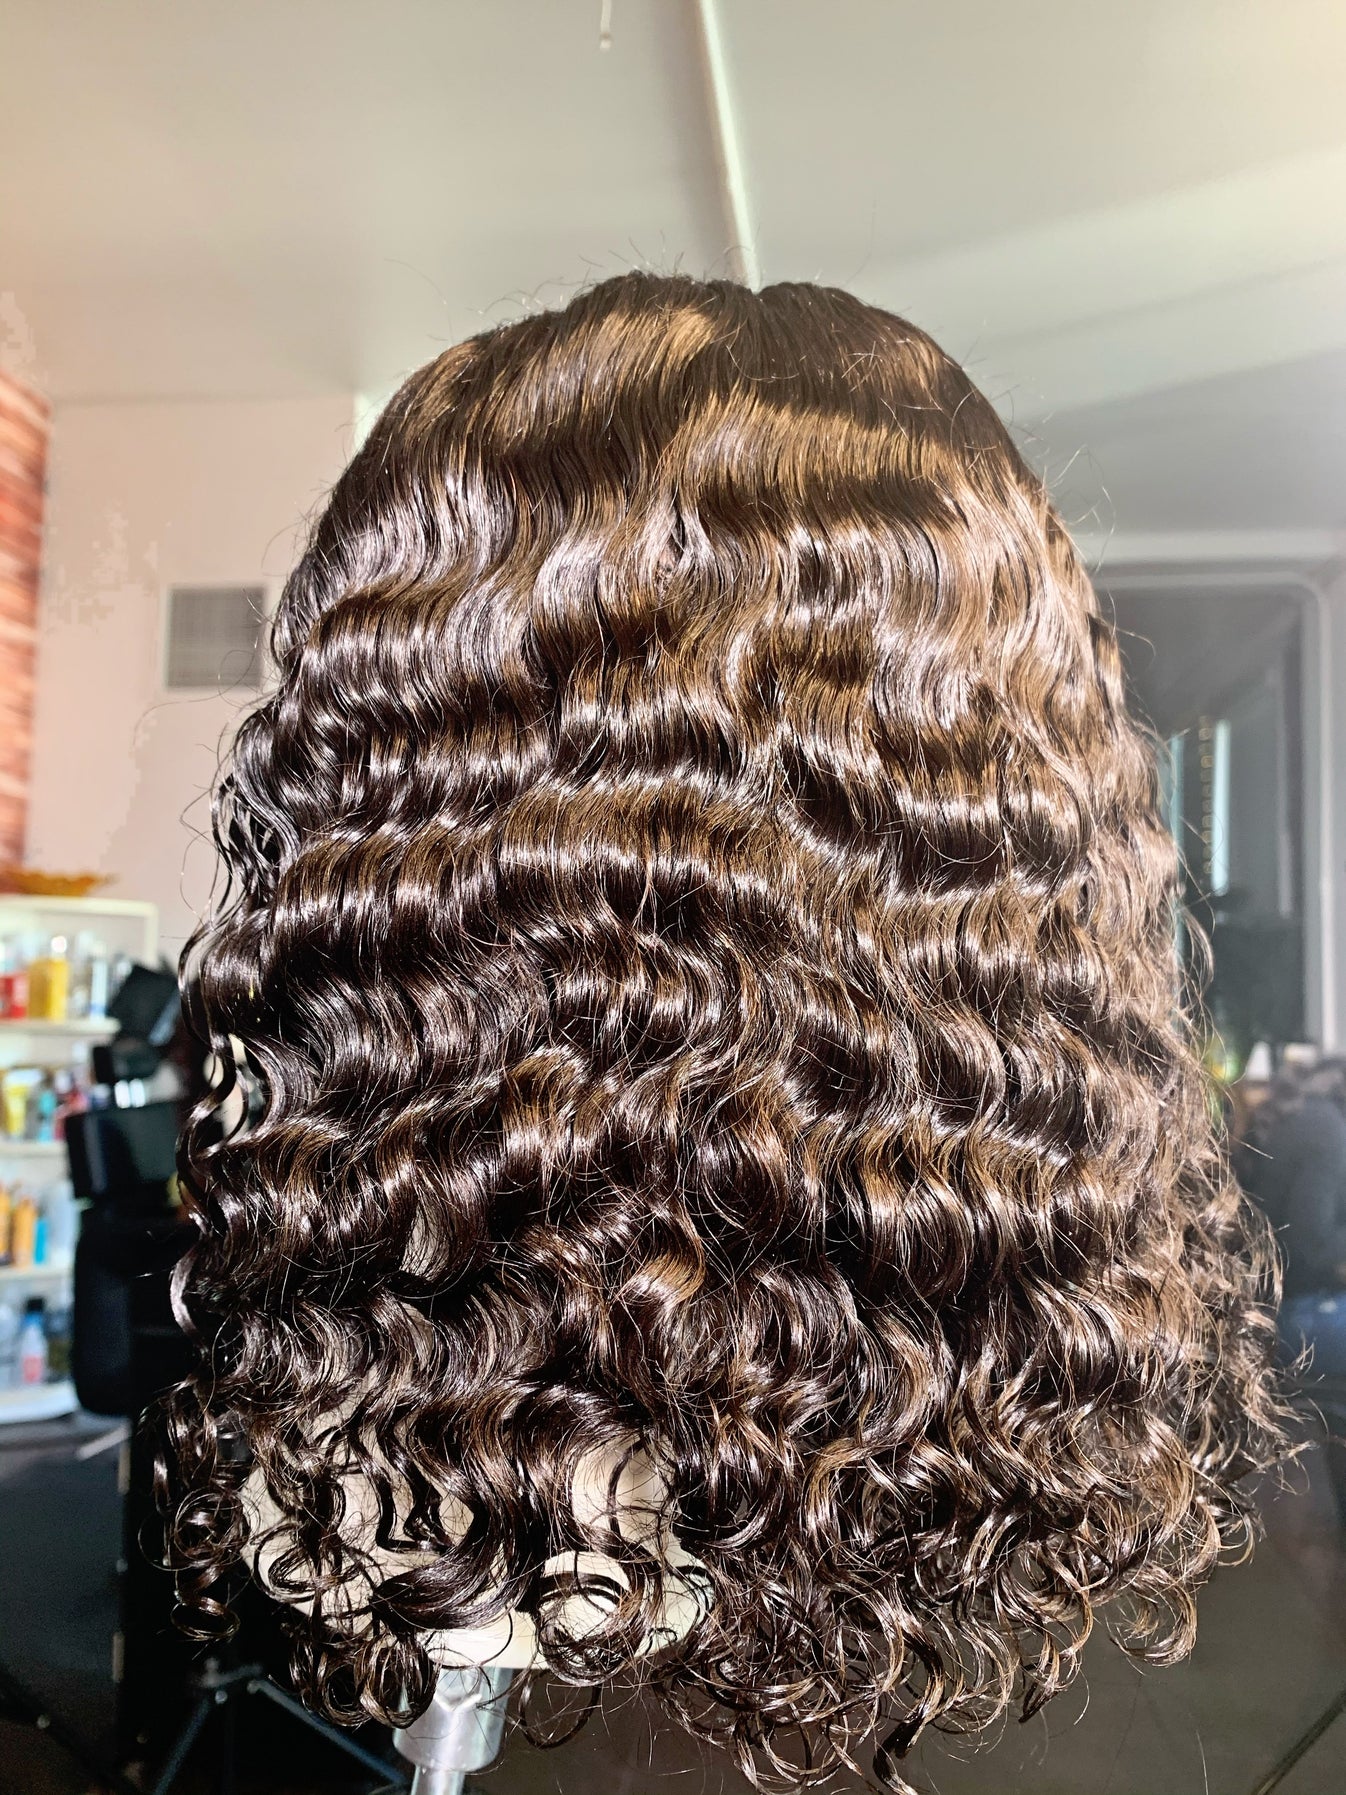 THREE CURL FRIENDS WALK INTO A BAR... – The Frontal Queen